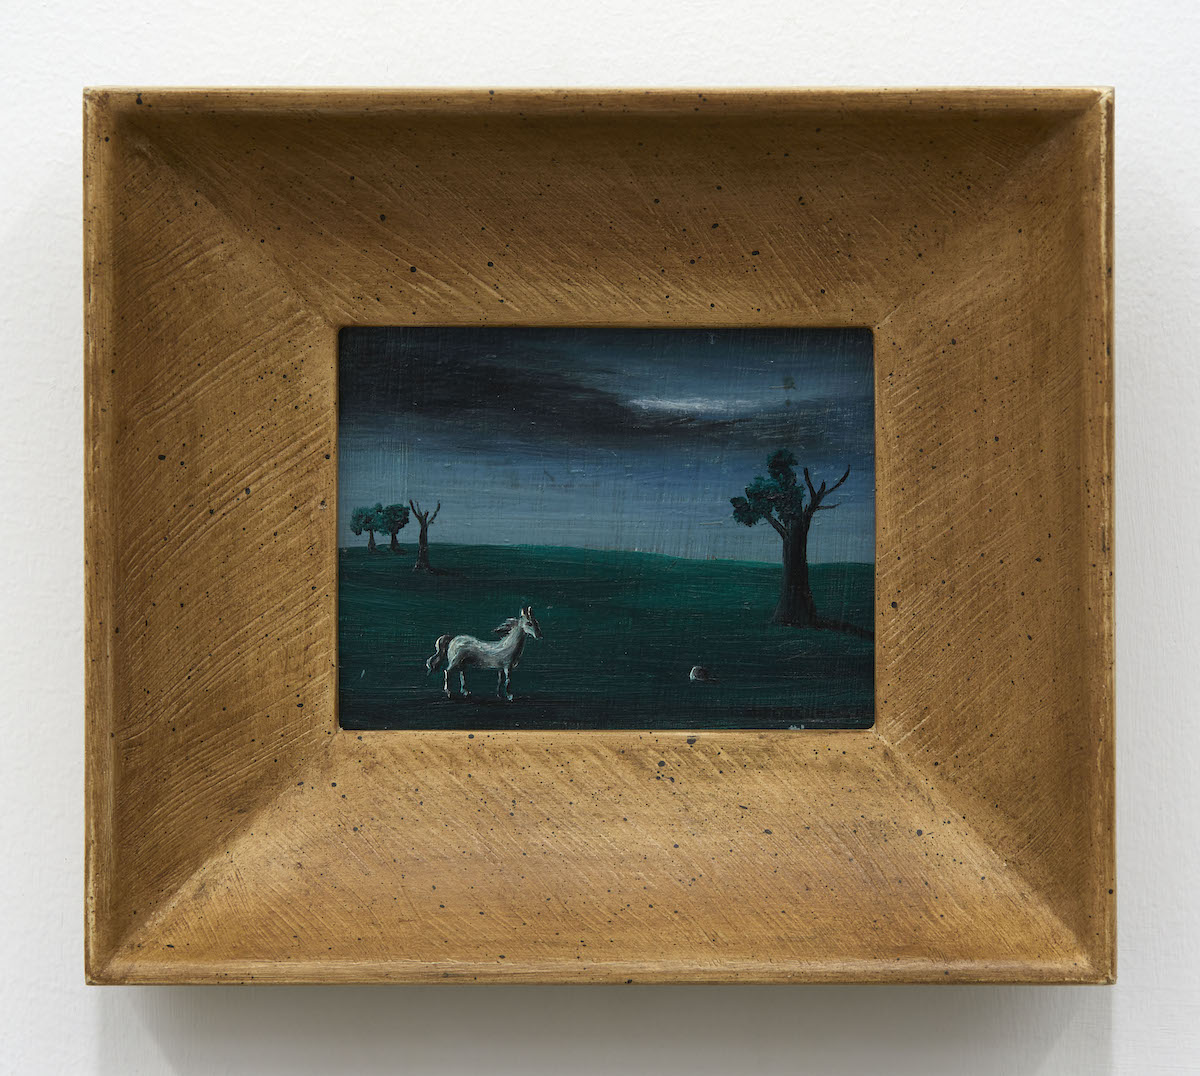 Inside a thick gold frame is a tiny Surrealist painting depicting a dark, moody sky and landscape. Three trees are in the background and one larger one is in the foreground atop dark green grass. Half the tree is dead, the other with leaves. One lone white horse stands towards the bottom of the frame.